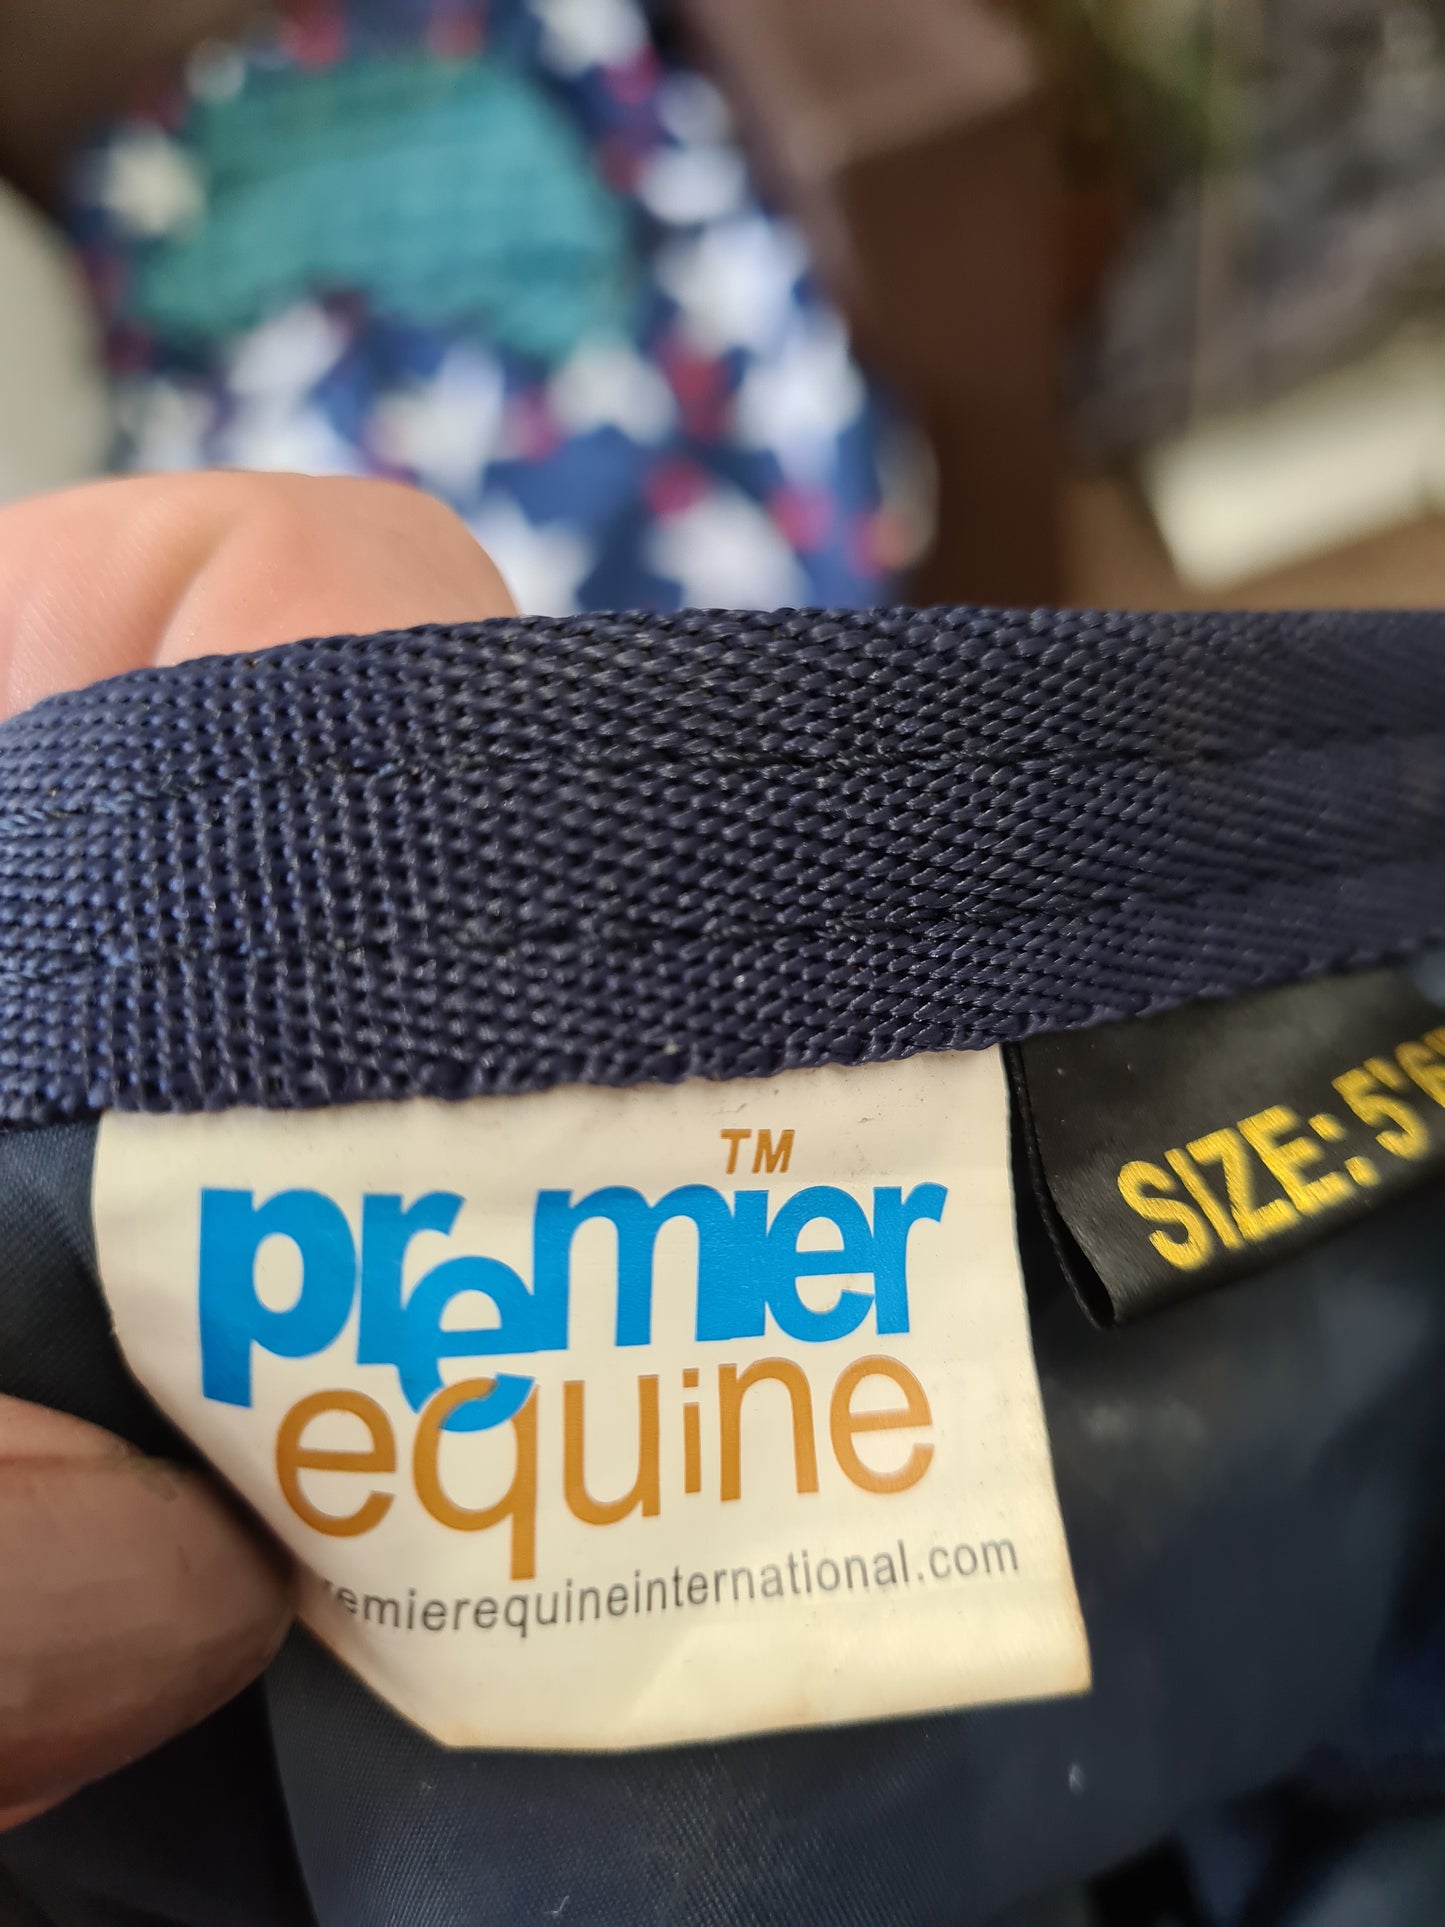 Used 5'6"  Navy Premier Equine turnout neck piece FREE POSTAGE 🟢